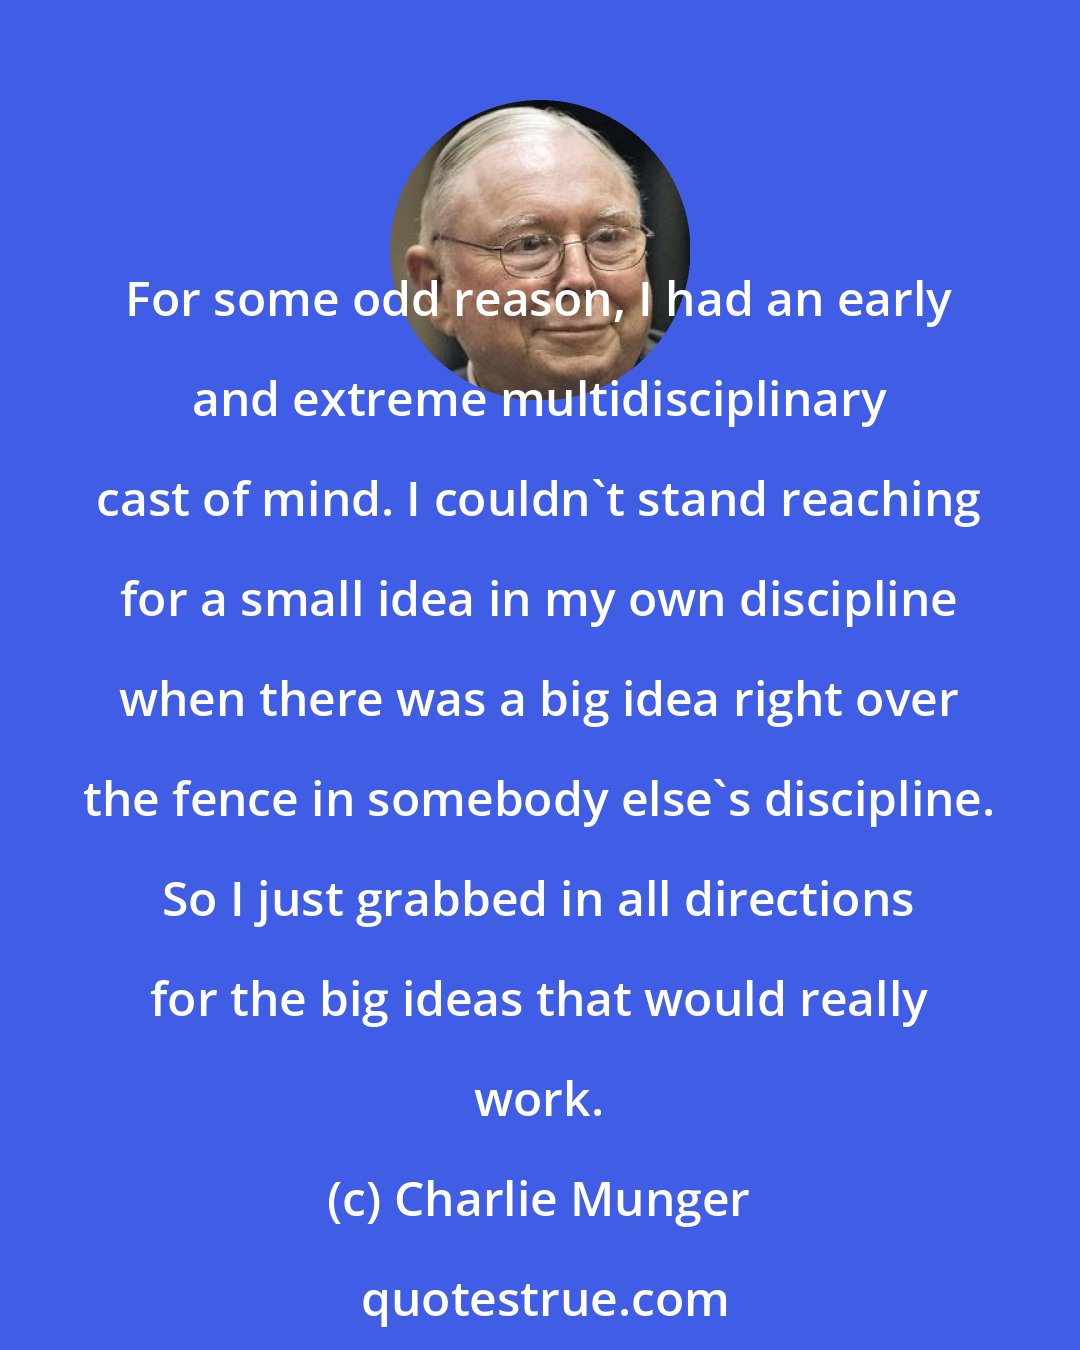 Charlie Munger: For some odd reason, I had an early and extreme multidisciplinary cast of mind. I couldn't stand reaching for a small idea in my own discipline when there was a big idea right over the fence in somebody else's discipline. So I just grabbed in all directions for the big ideas that would really work.